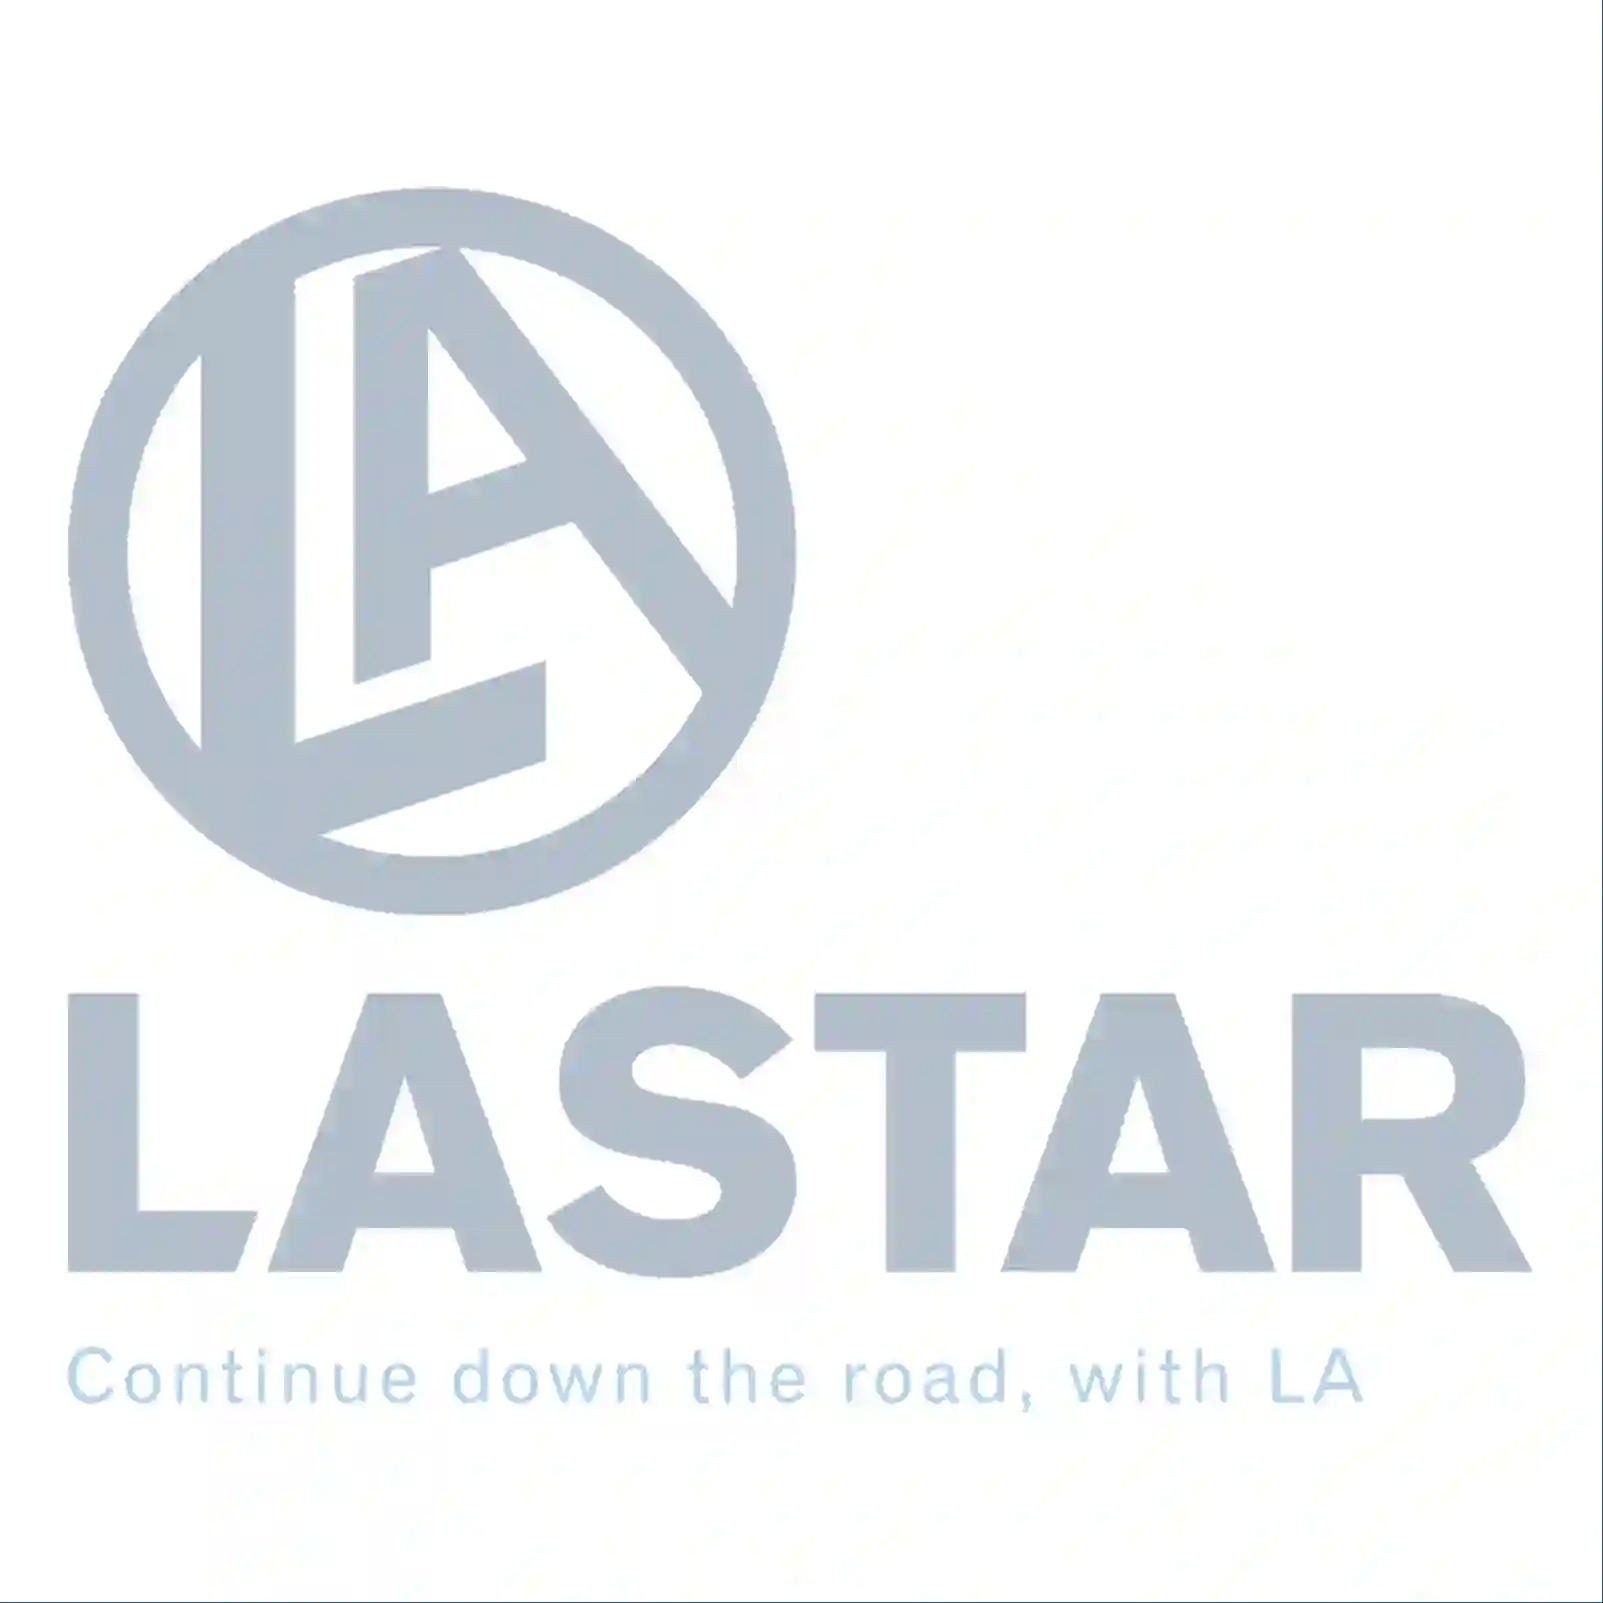  Turn signal lamp, lateral, left || Lastar Spare Part | Truck Spare Parts, Auotomotive Spare Parts